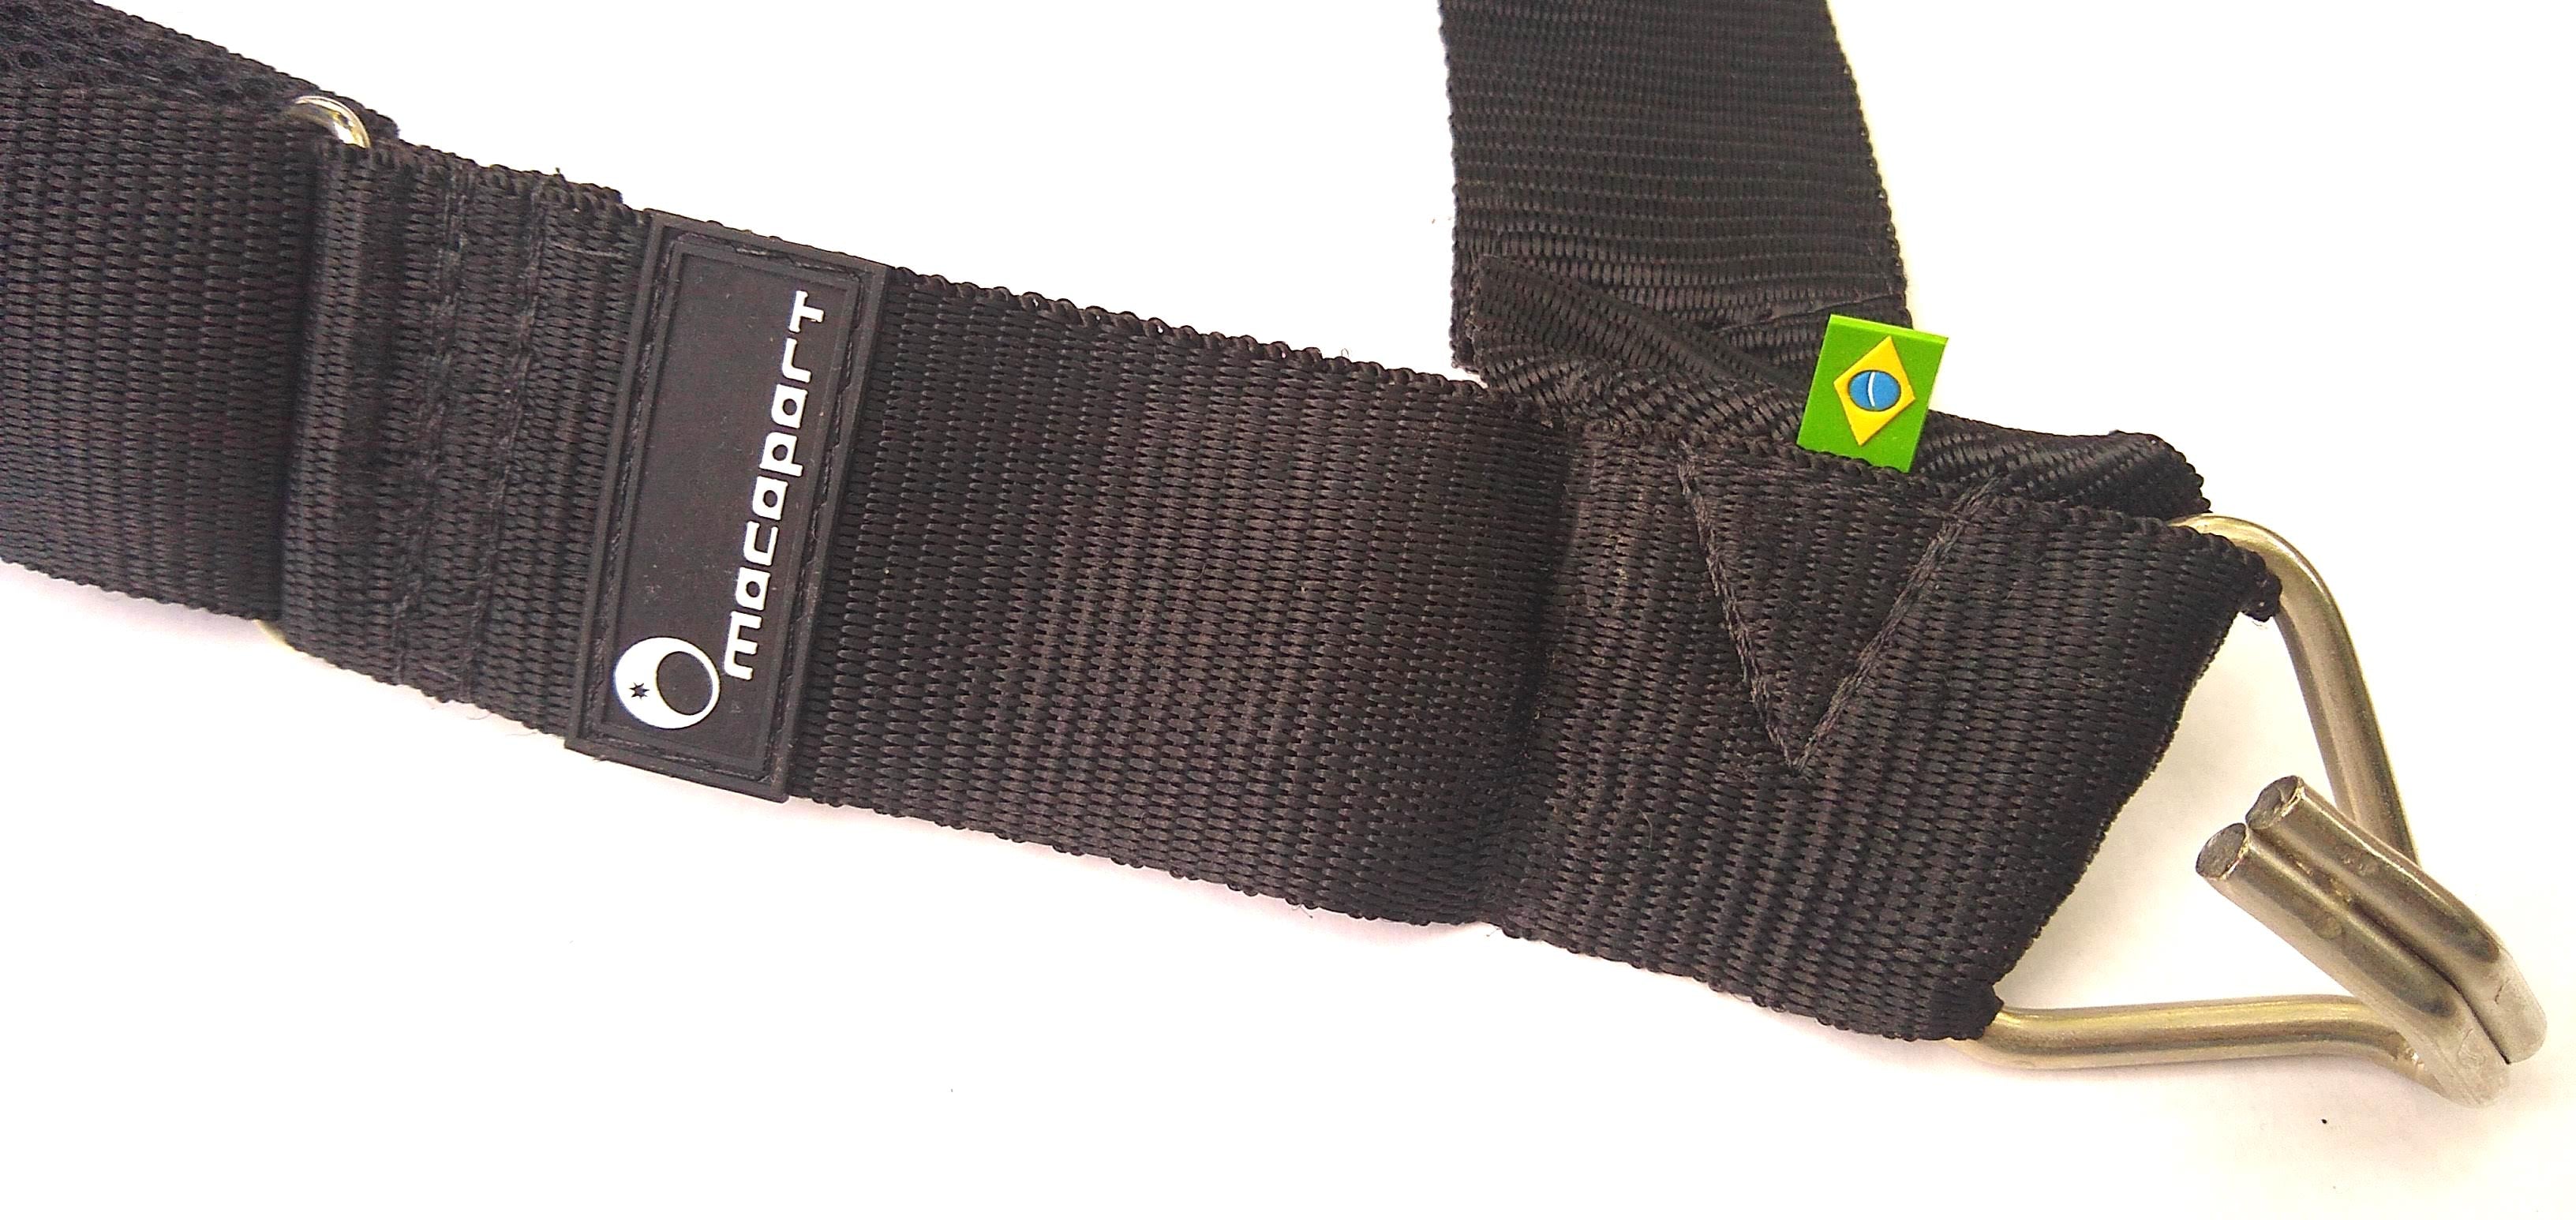 Macapart Padded Multi Use Waist Drum Strap - Buy Brazilian drums at